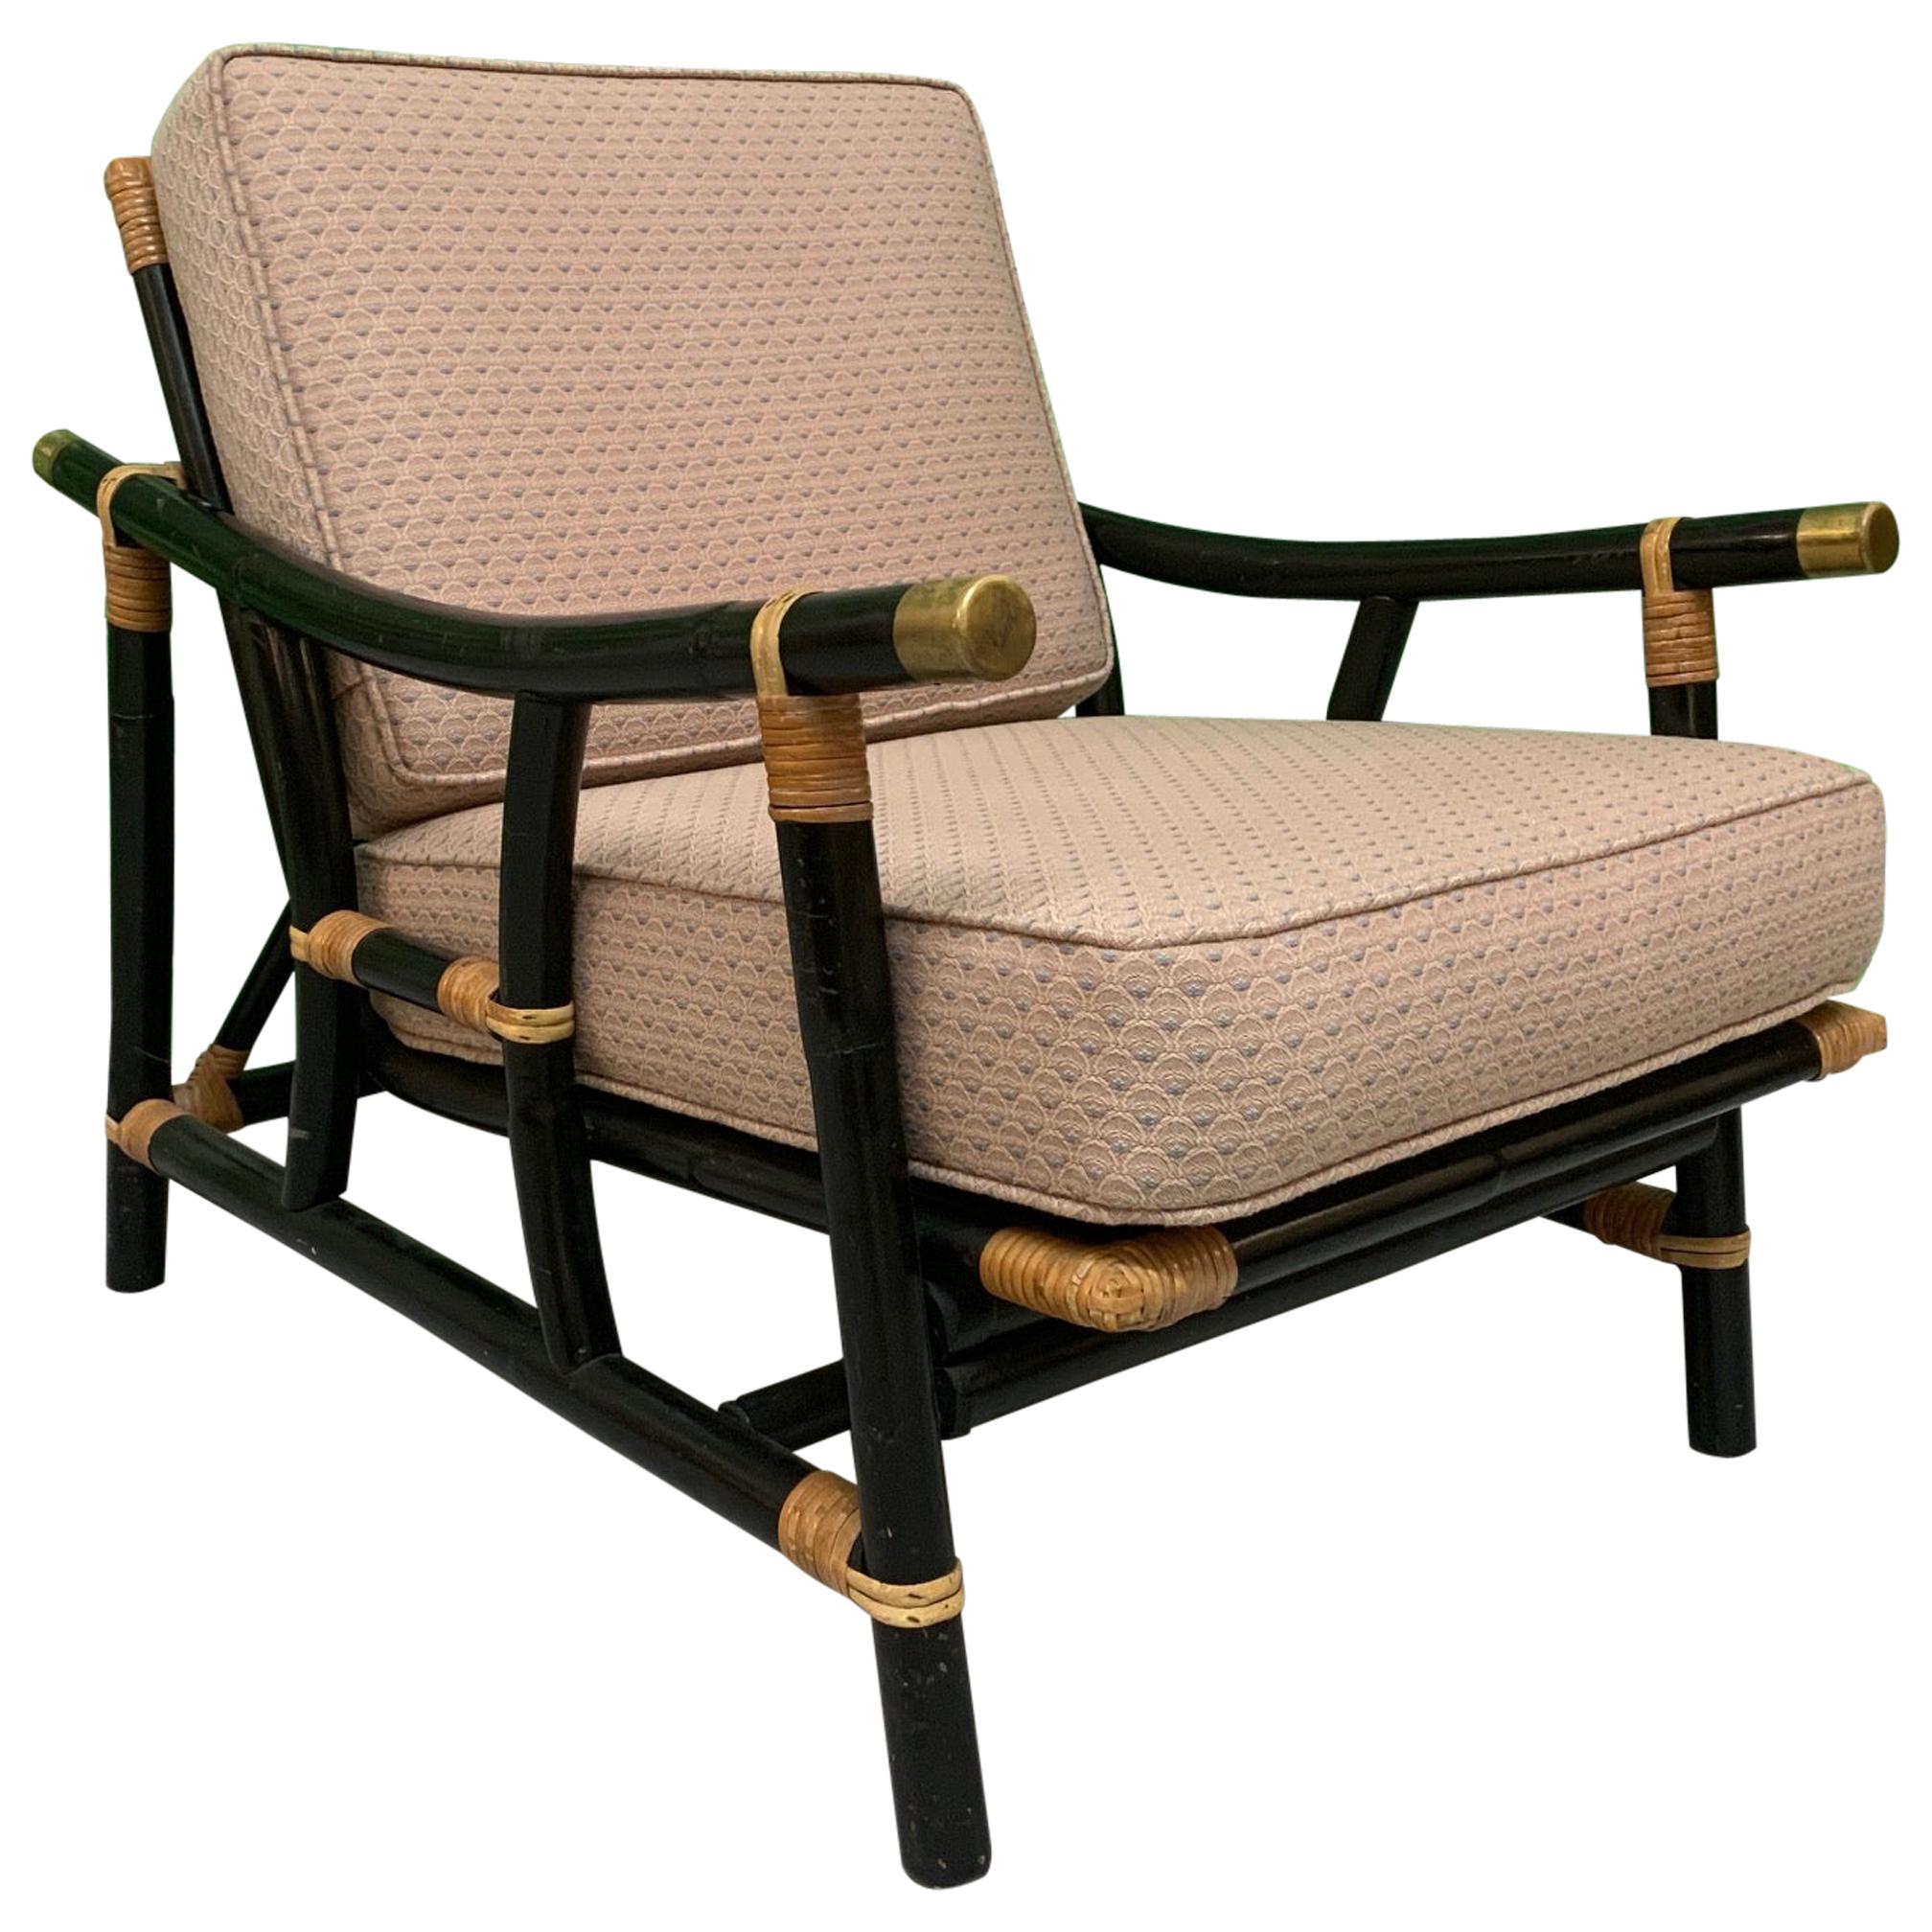 Black and Tan Rattan Lounge Chair For Sale at 1stDibs